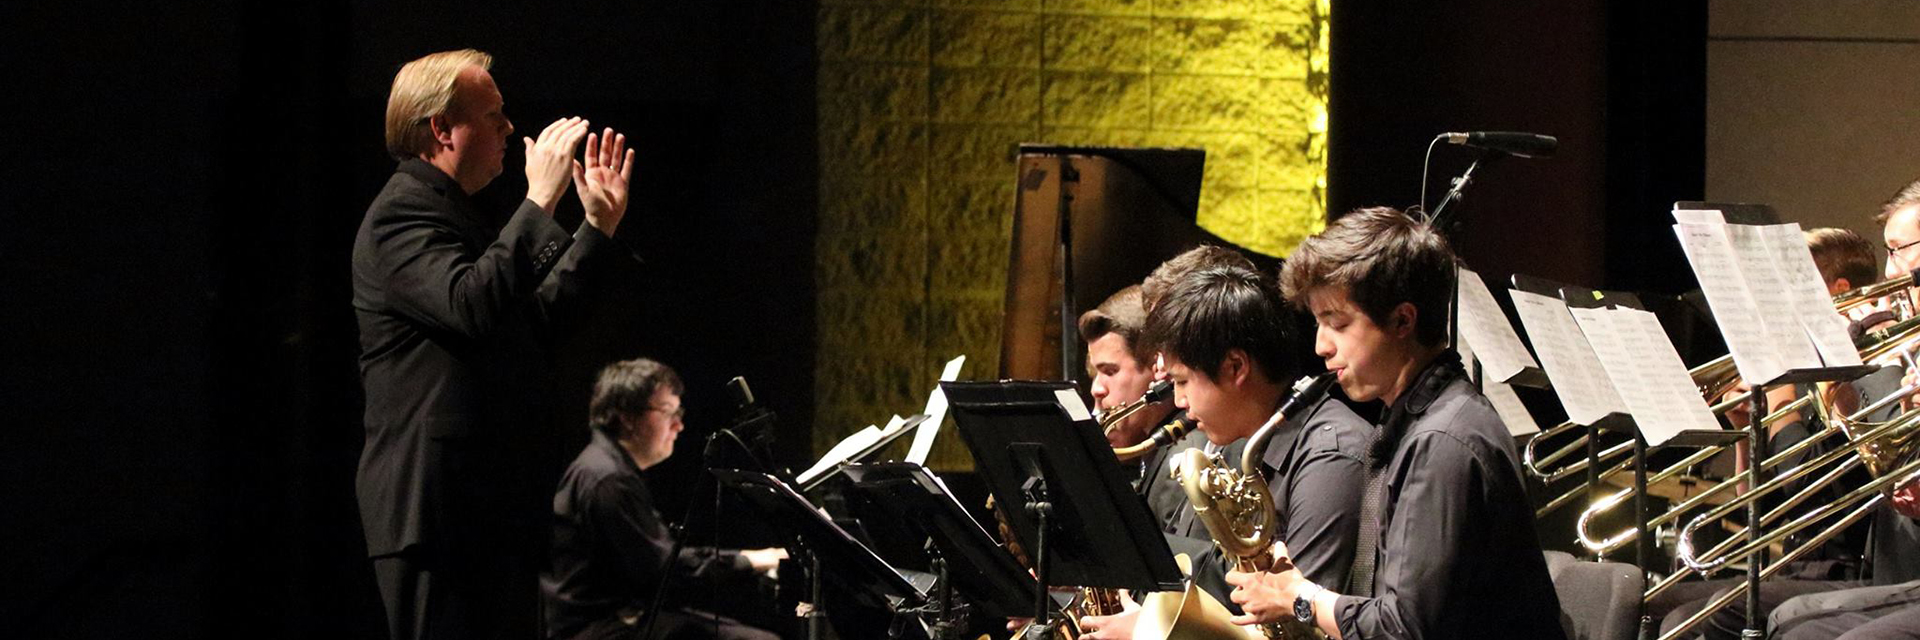 Jazz ensemble plays at Ferst under the direction of Chip Crotts